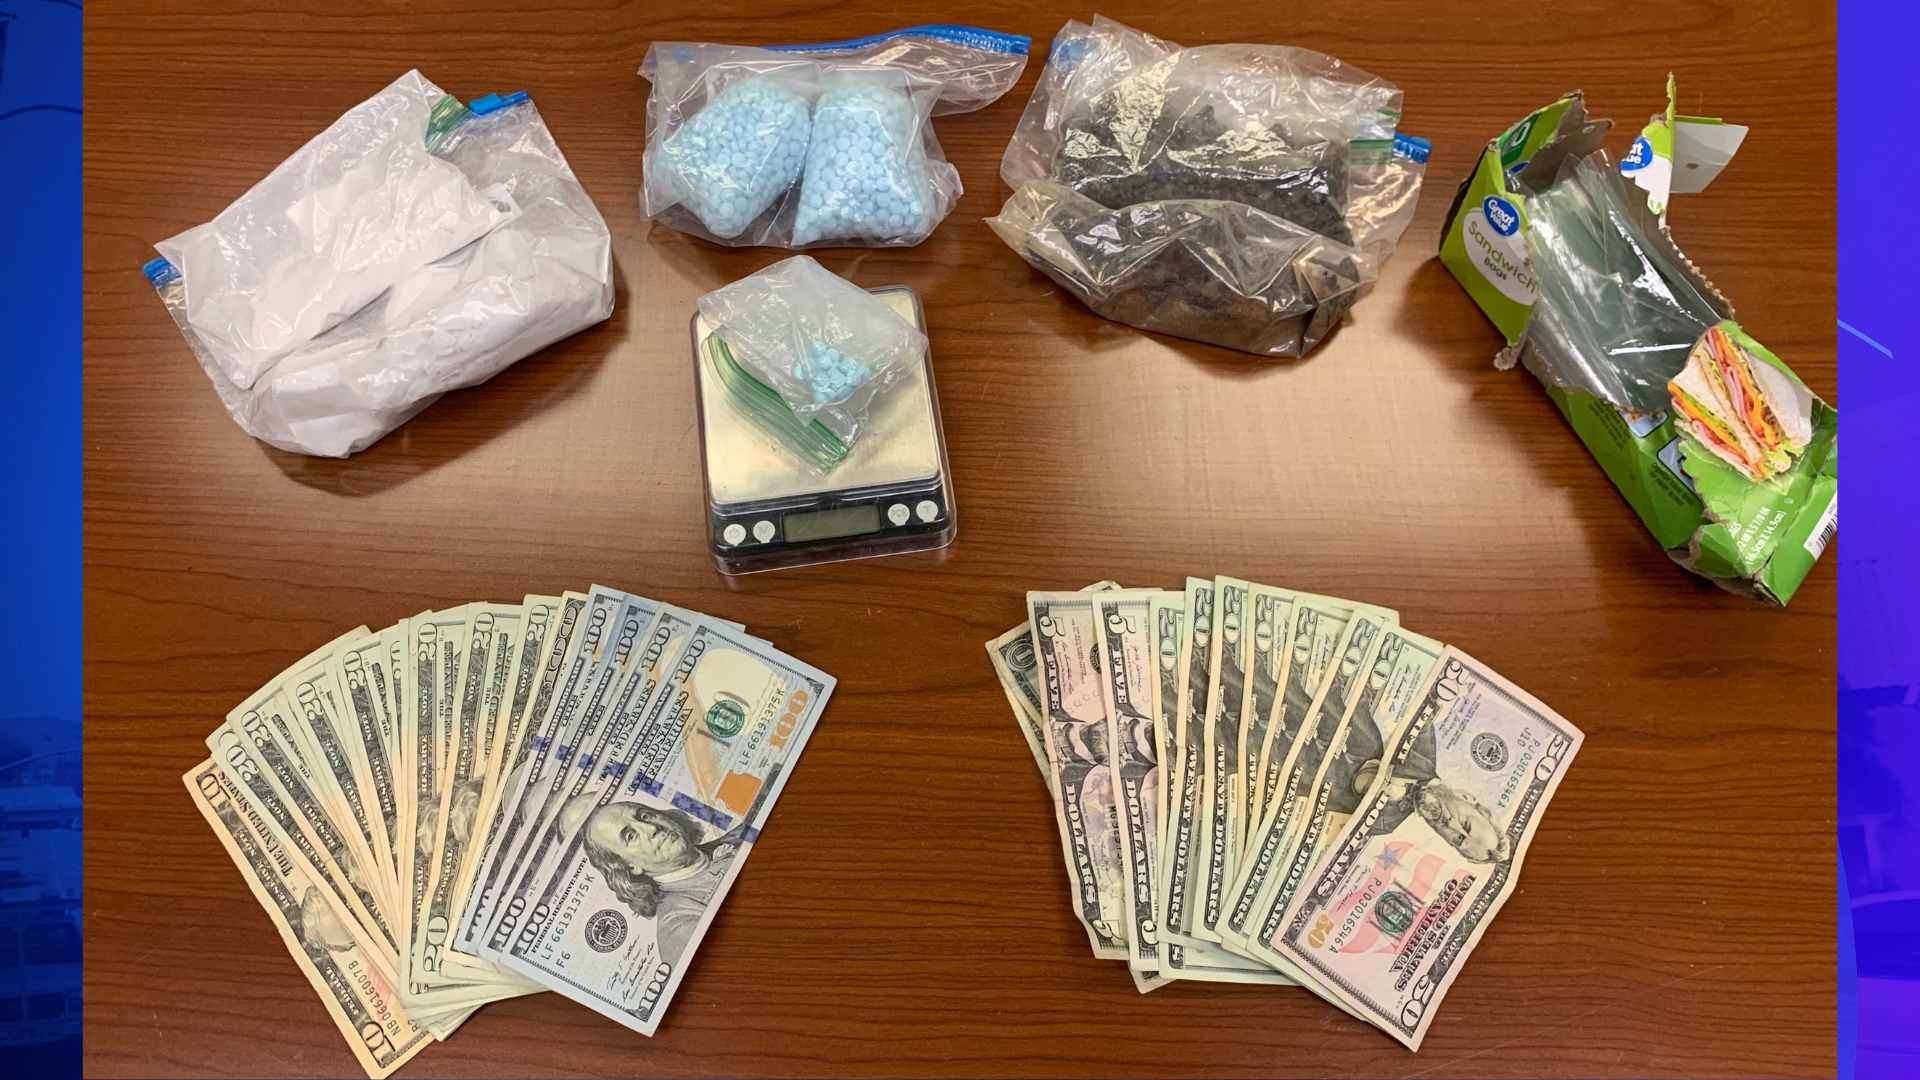 A man was arrested in Ventura County for allegedly working as a narcotics delivery driver in an operation owned by Mexican cartels